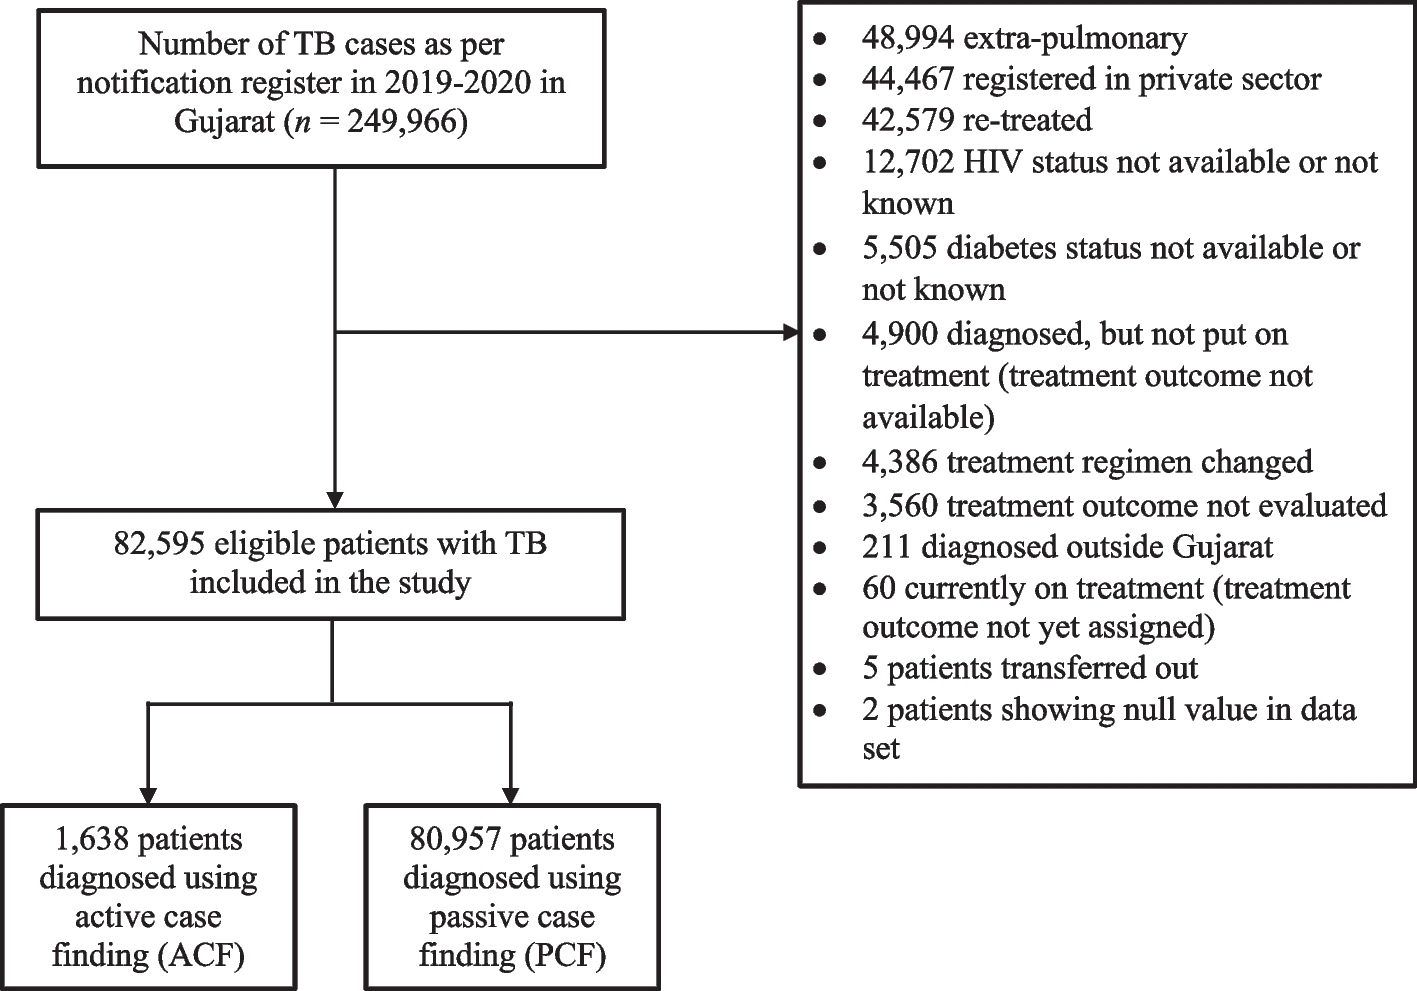 A mixed-methods study on impact of active case finding on pulmonary tuberculosis treatment outcomes in India